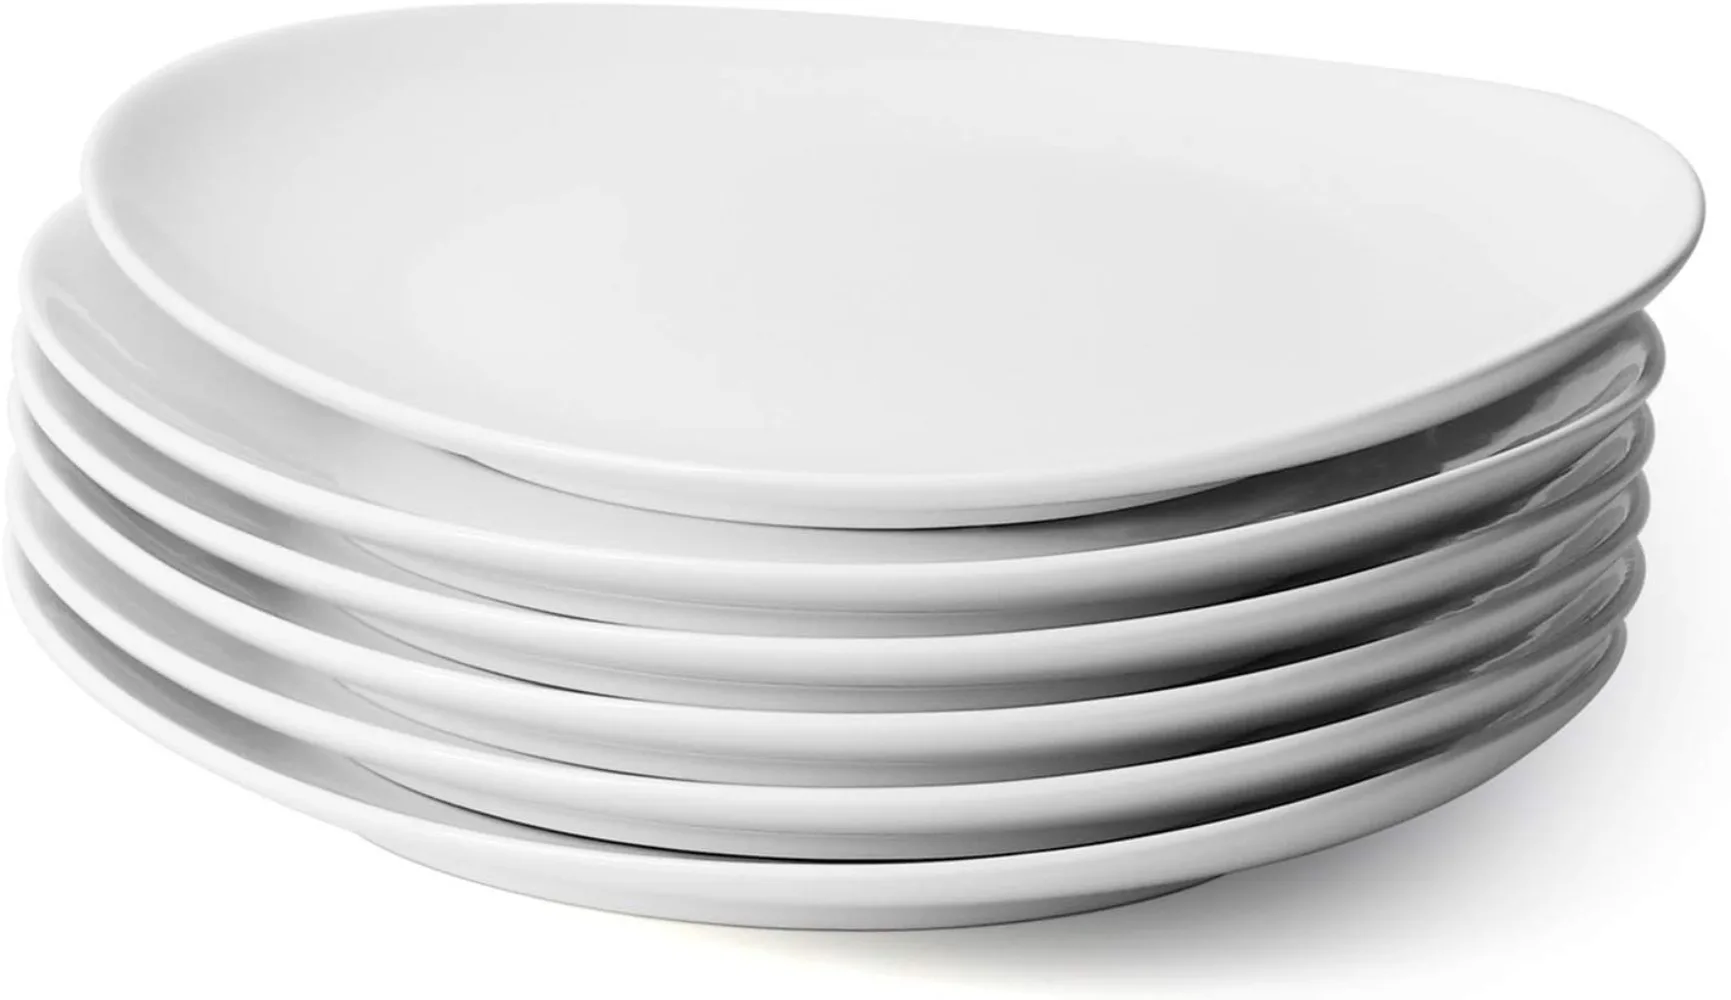 

Sweese White Dinner Plates Set of 6-11 Inch Porcelain Square Plates - Dishwasher, Microwave, Oven Safe, Scratch Resistant